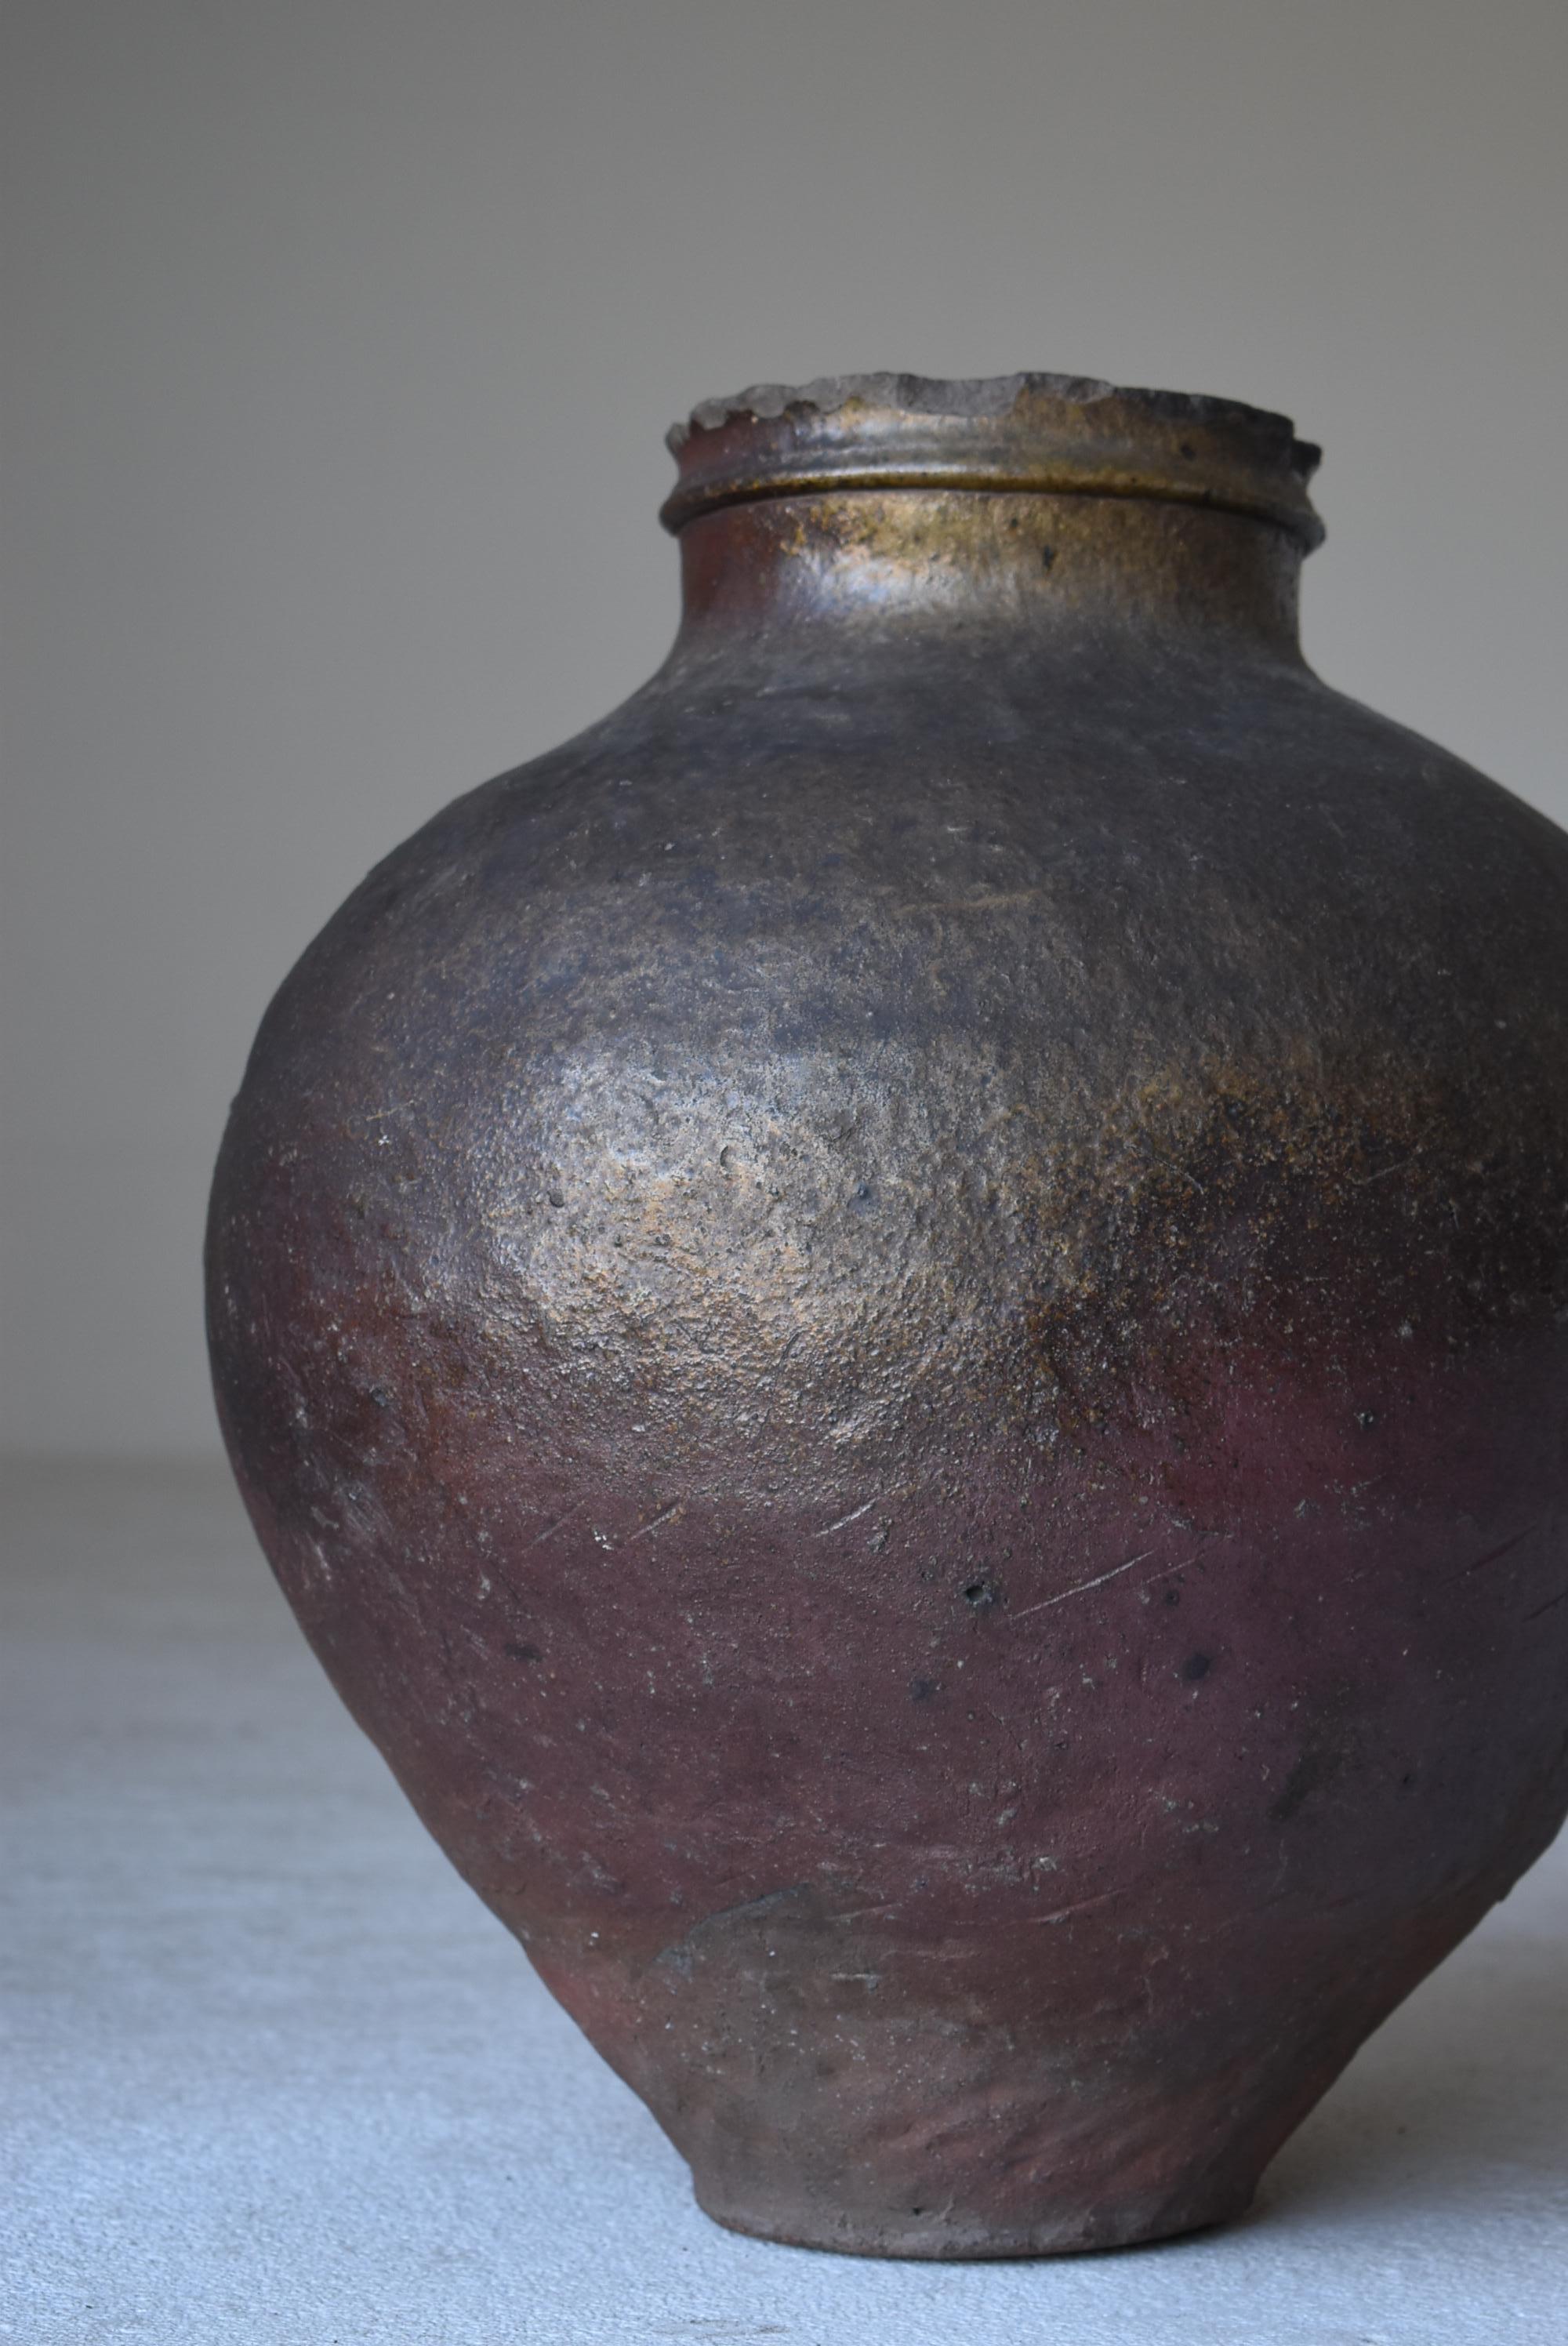 It is a jar baked in Japan's TOKONAME (Aichi Prefecture).
The era seems to be the Edo period (1700s-1850s).

In Japan, this jar was used to carry water.

It's done its job, but it's enough to put it aside and look at it.
Please enjoy the world of